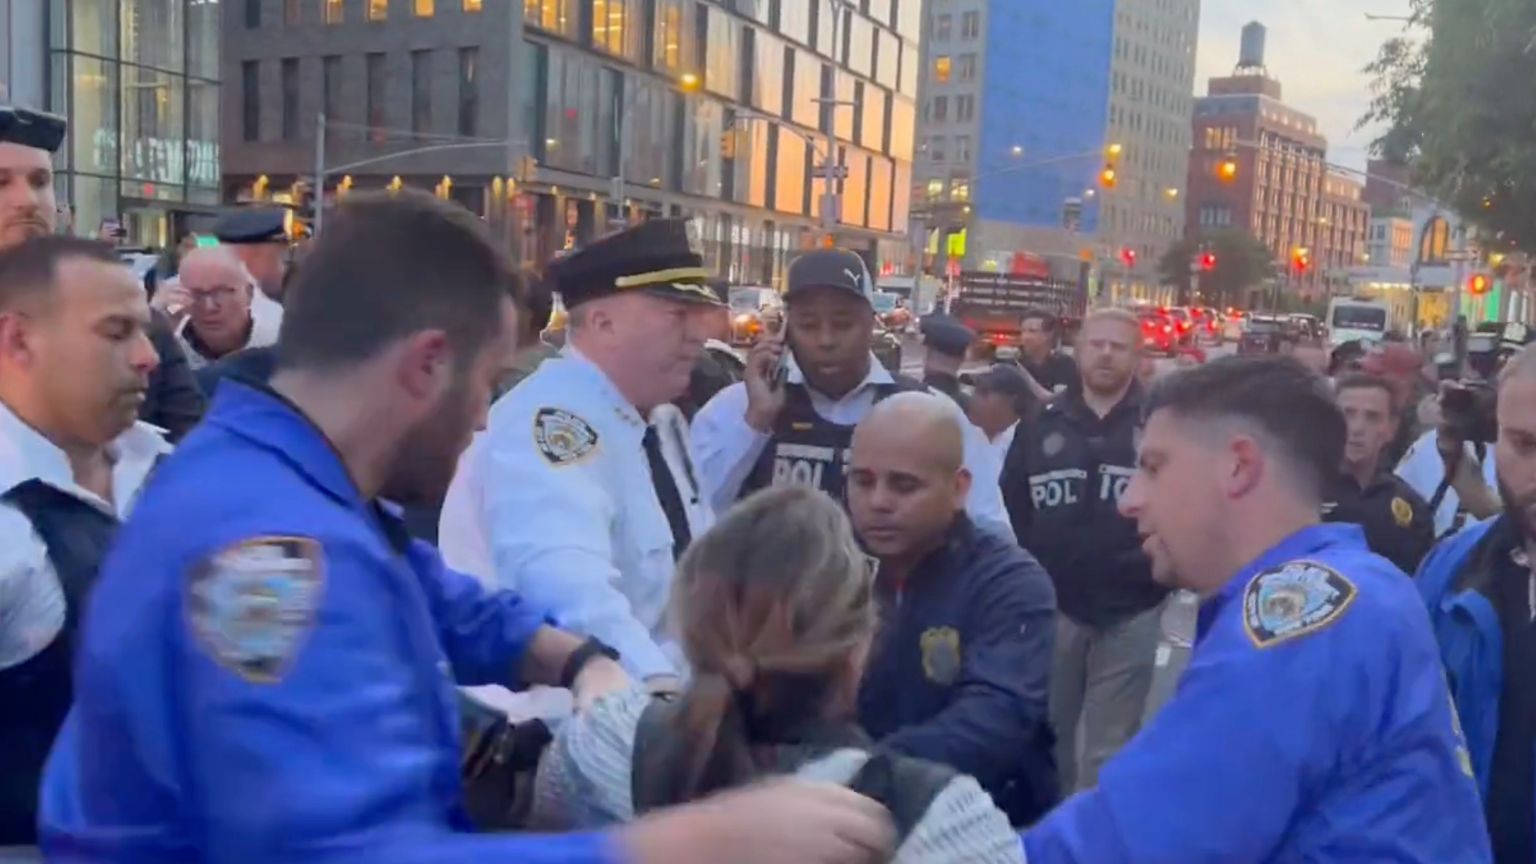 New York Photo Journalist Arrested at Neely Protest